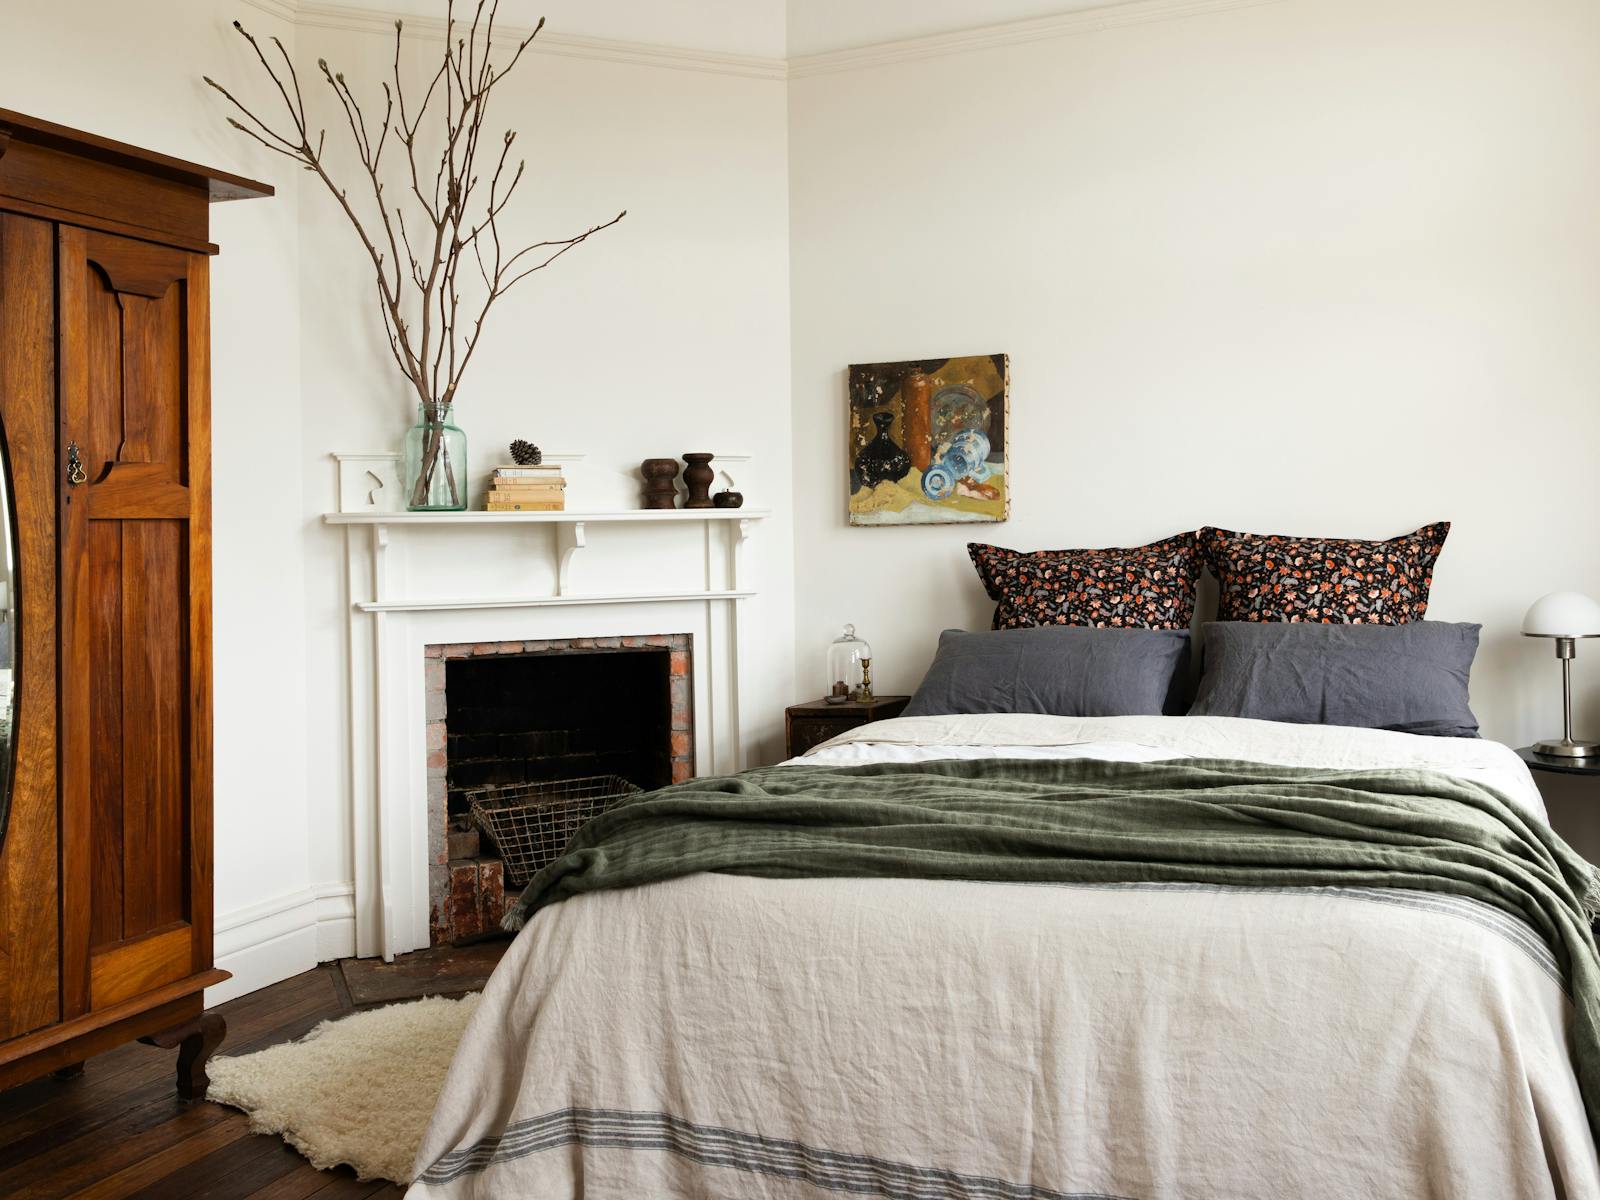 A bedroom with queen bed, textured linens and vintage artwork